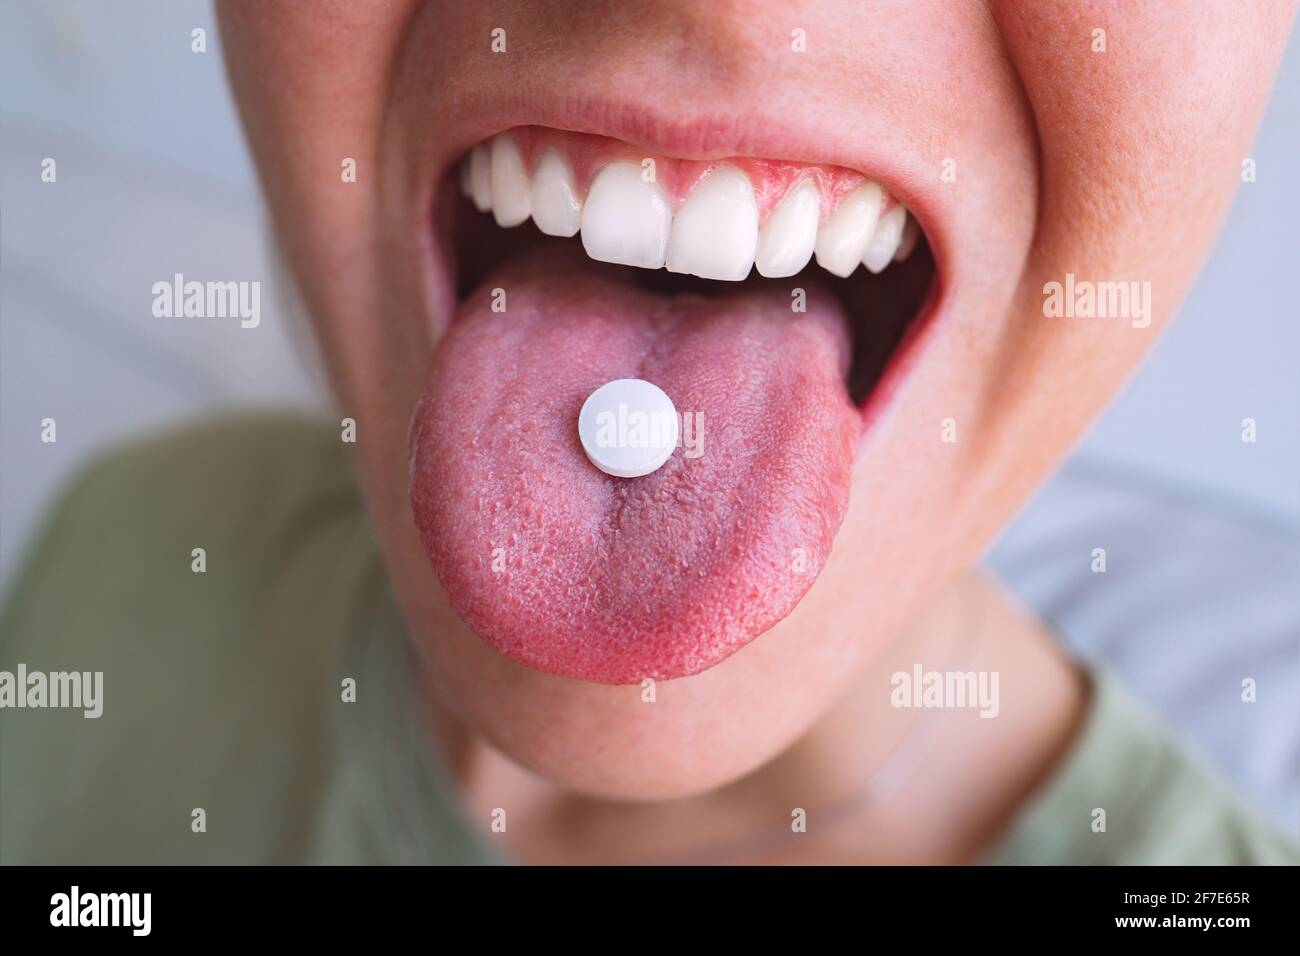 Young woman taking pill. Closeup of white round pill on tongue. Open mouth holding tablet Stock Photo